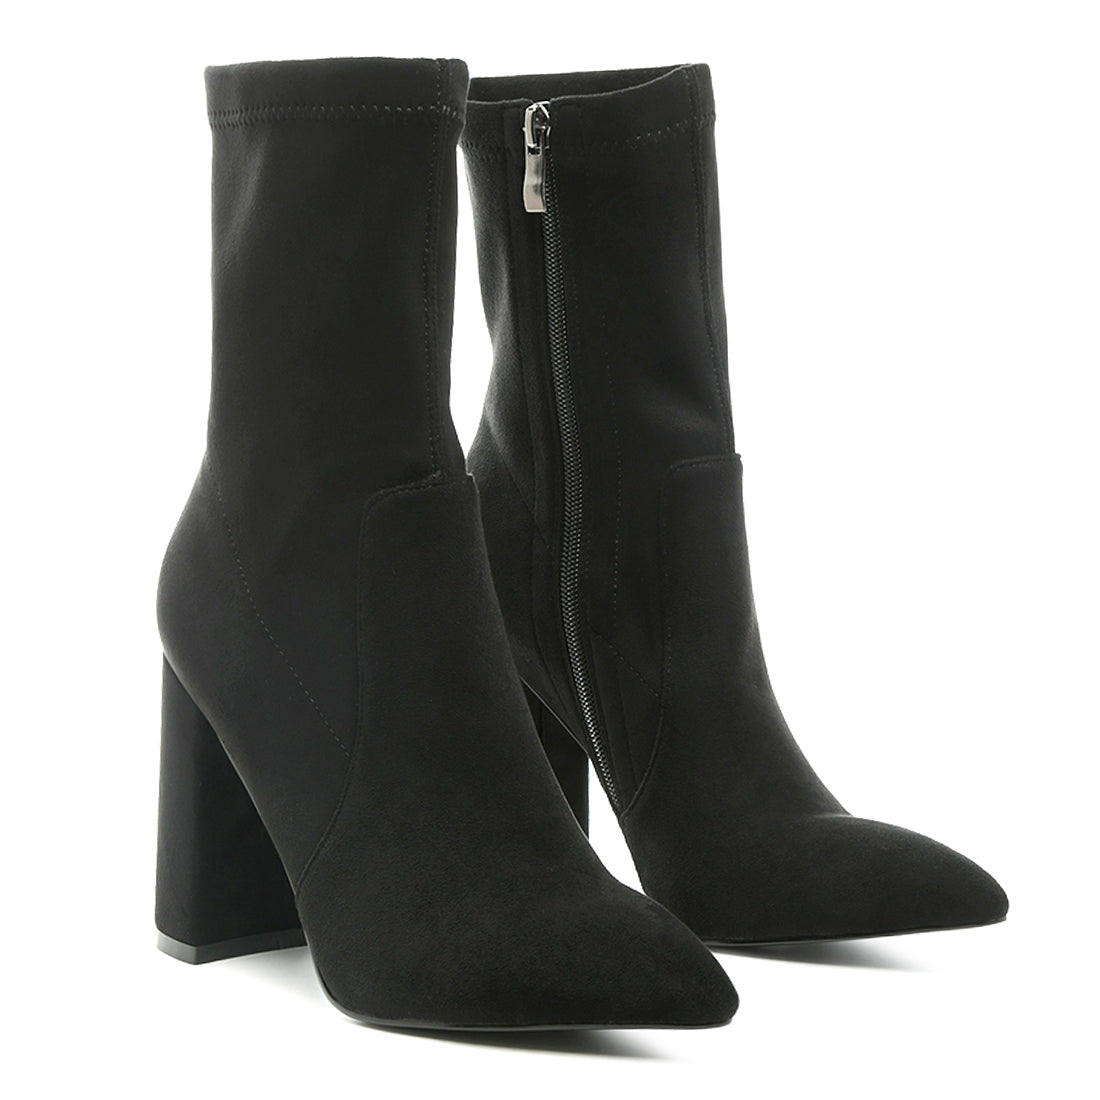 High Block Heeled Boots in Black